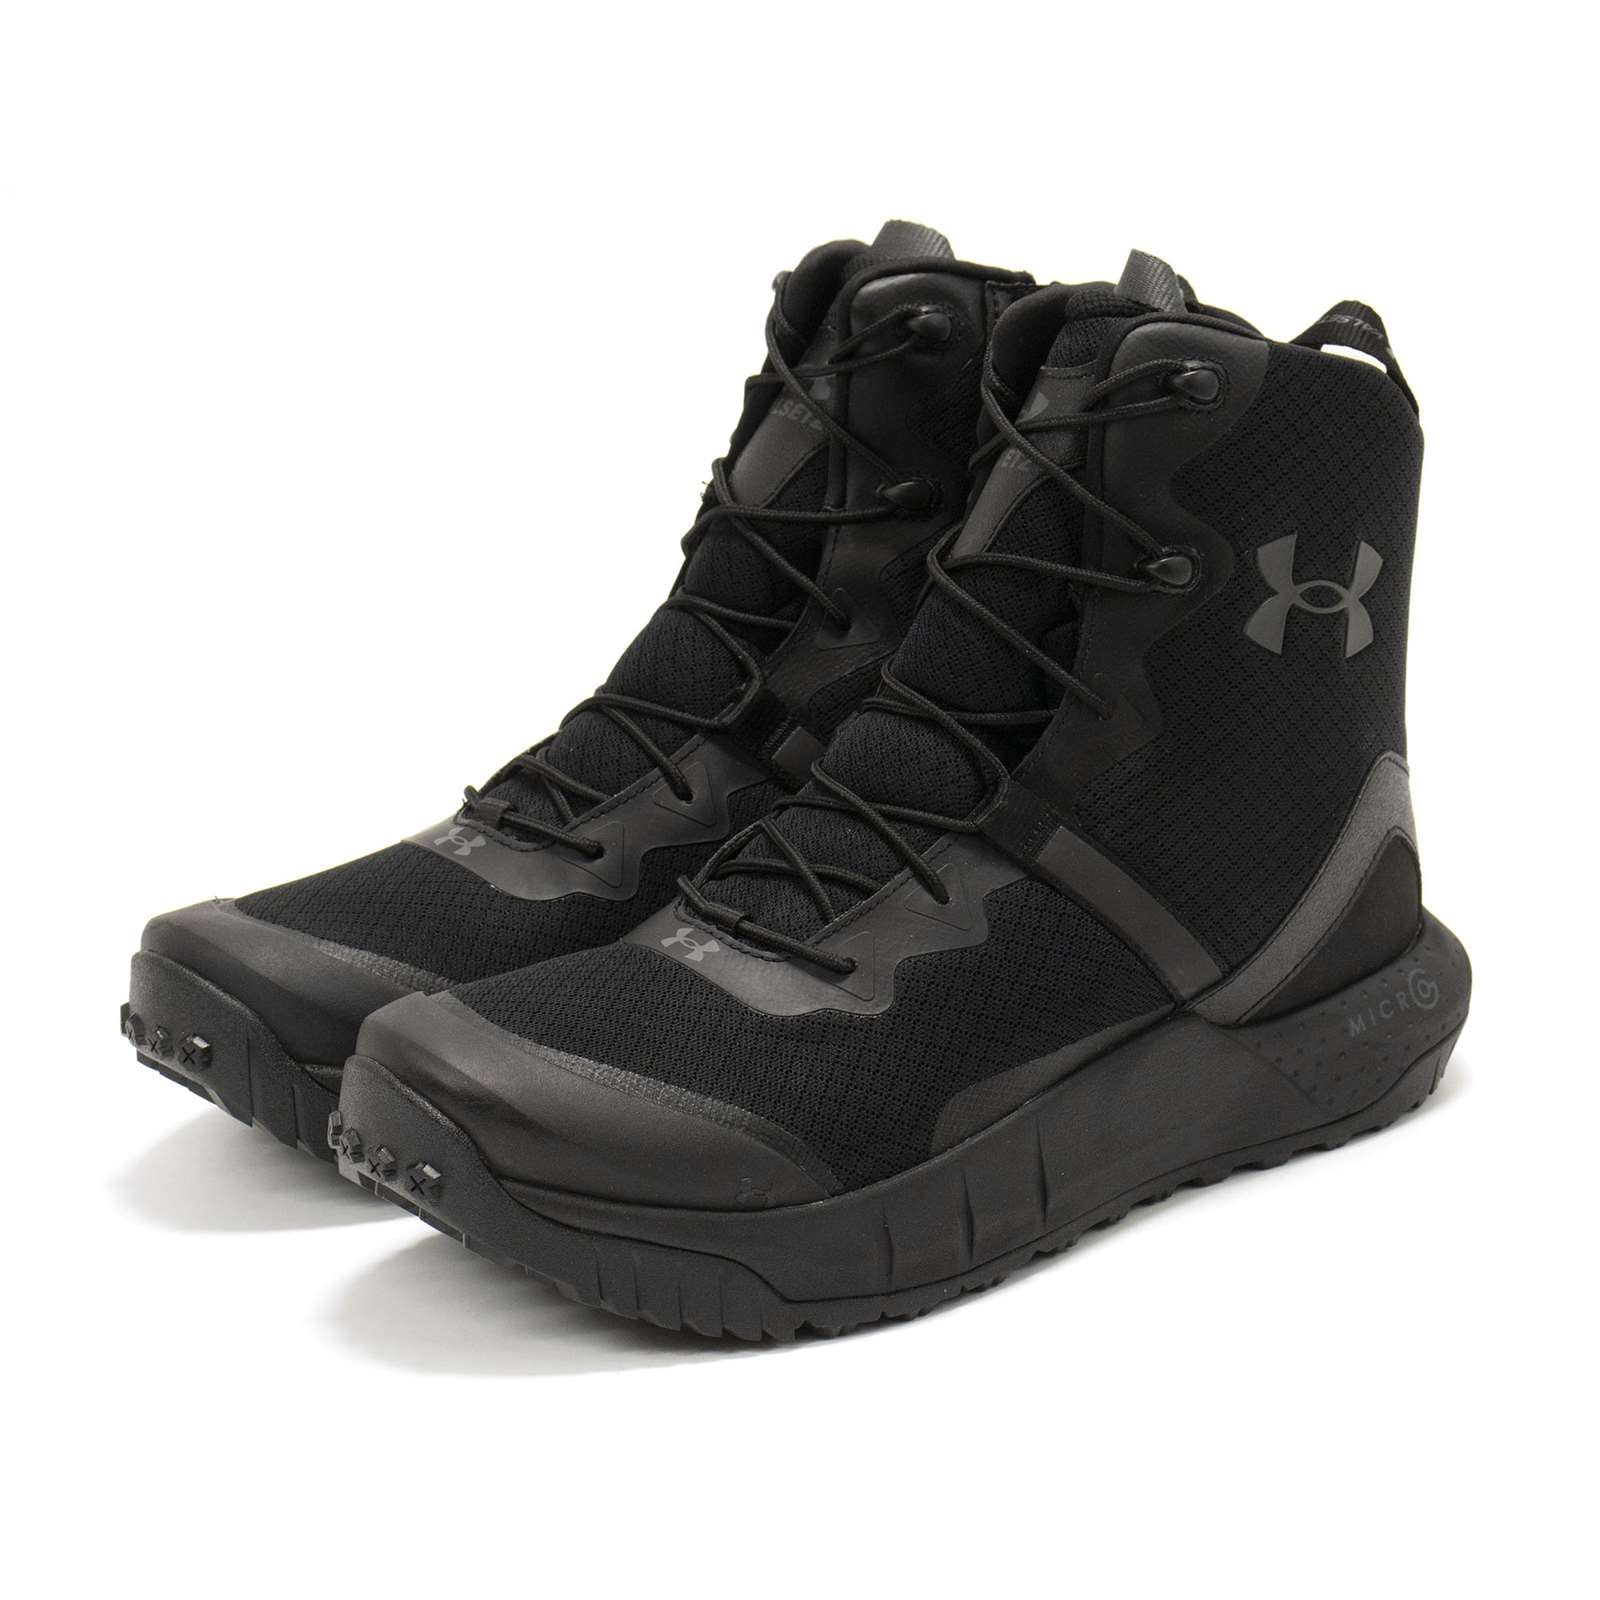 Under Armour Men Micro G Valsetz Zip Military And Tactical Boot